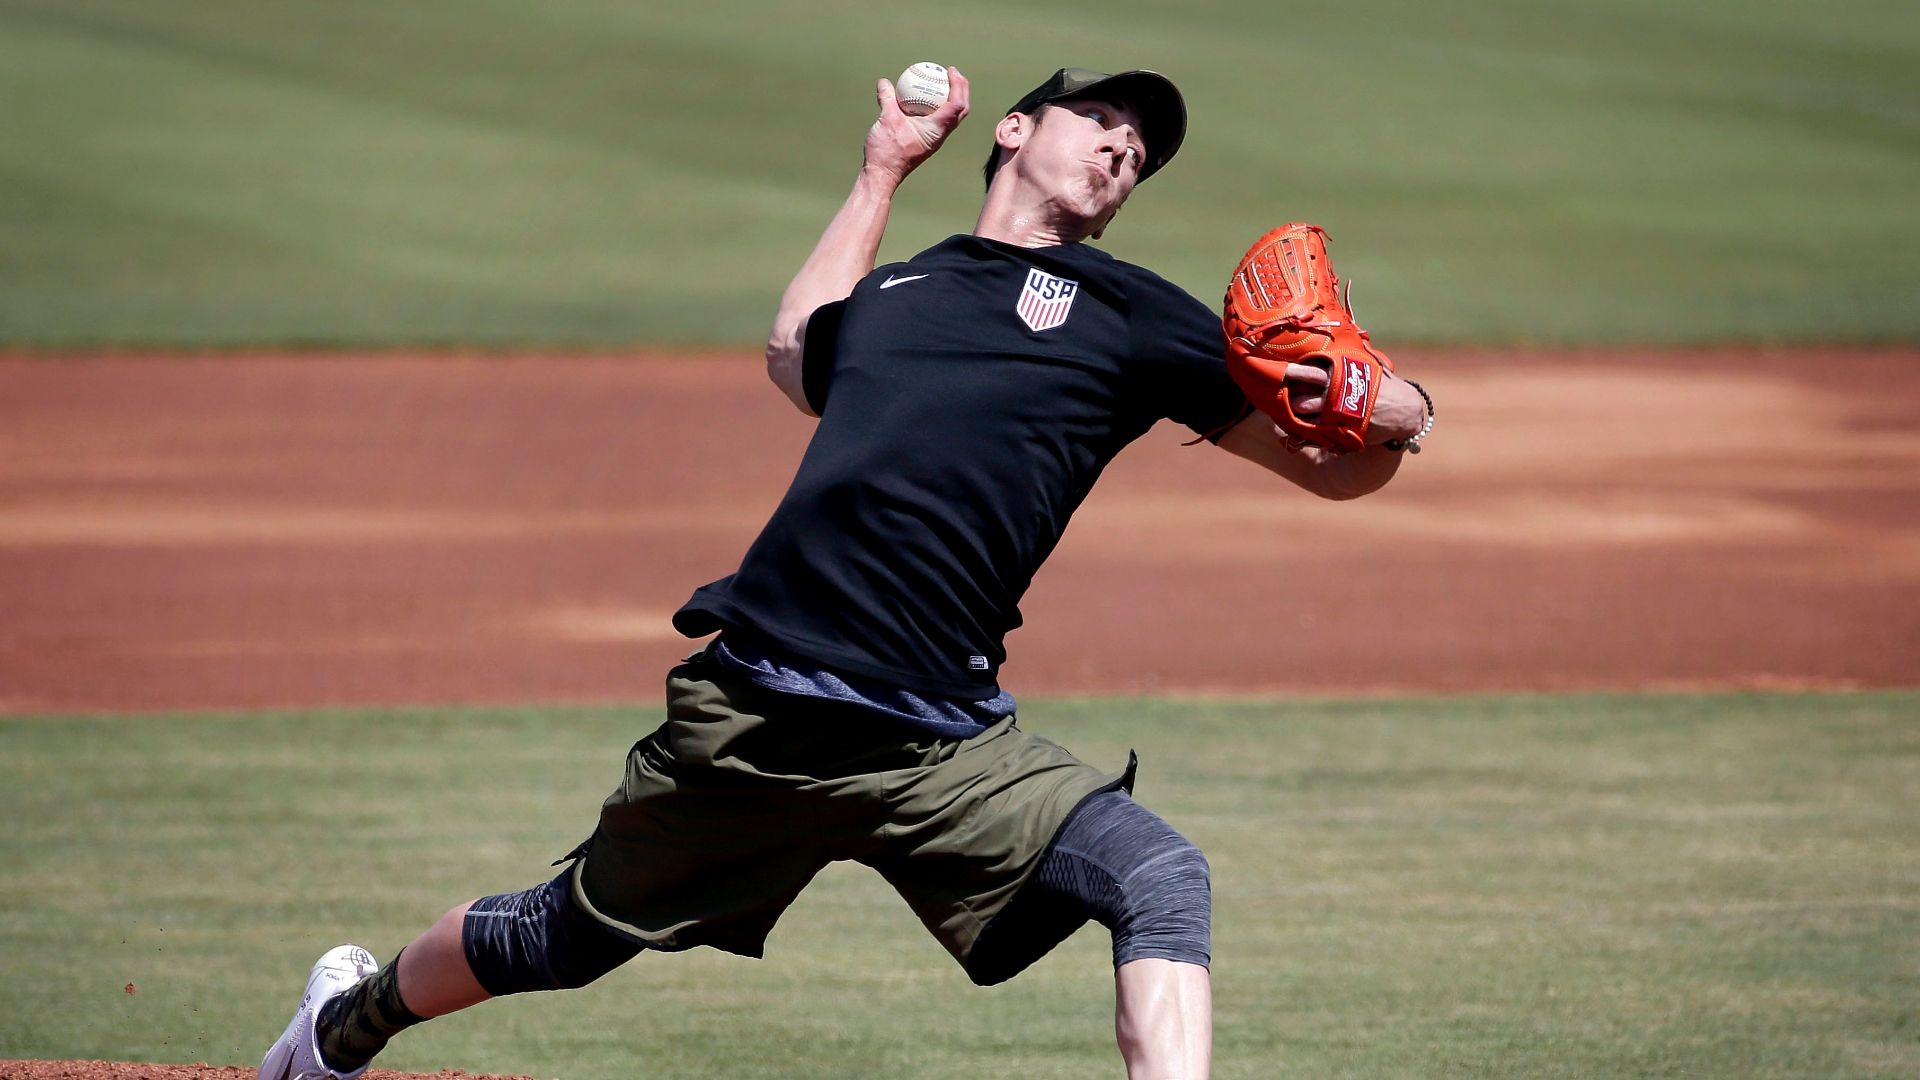 Right-hander Tim Lincecum agrees to deal with Angels - ABC7 New York